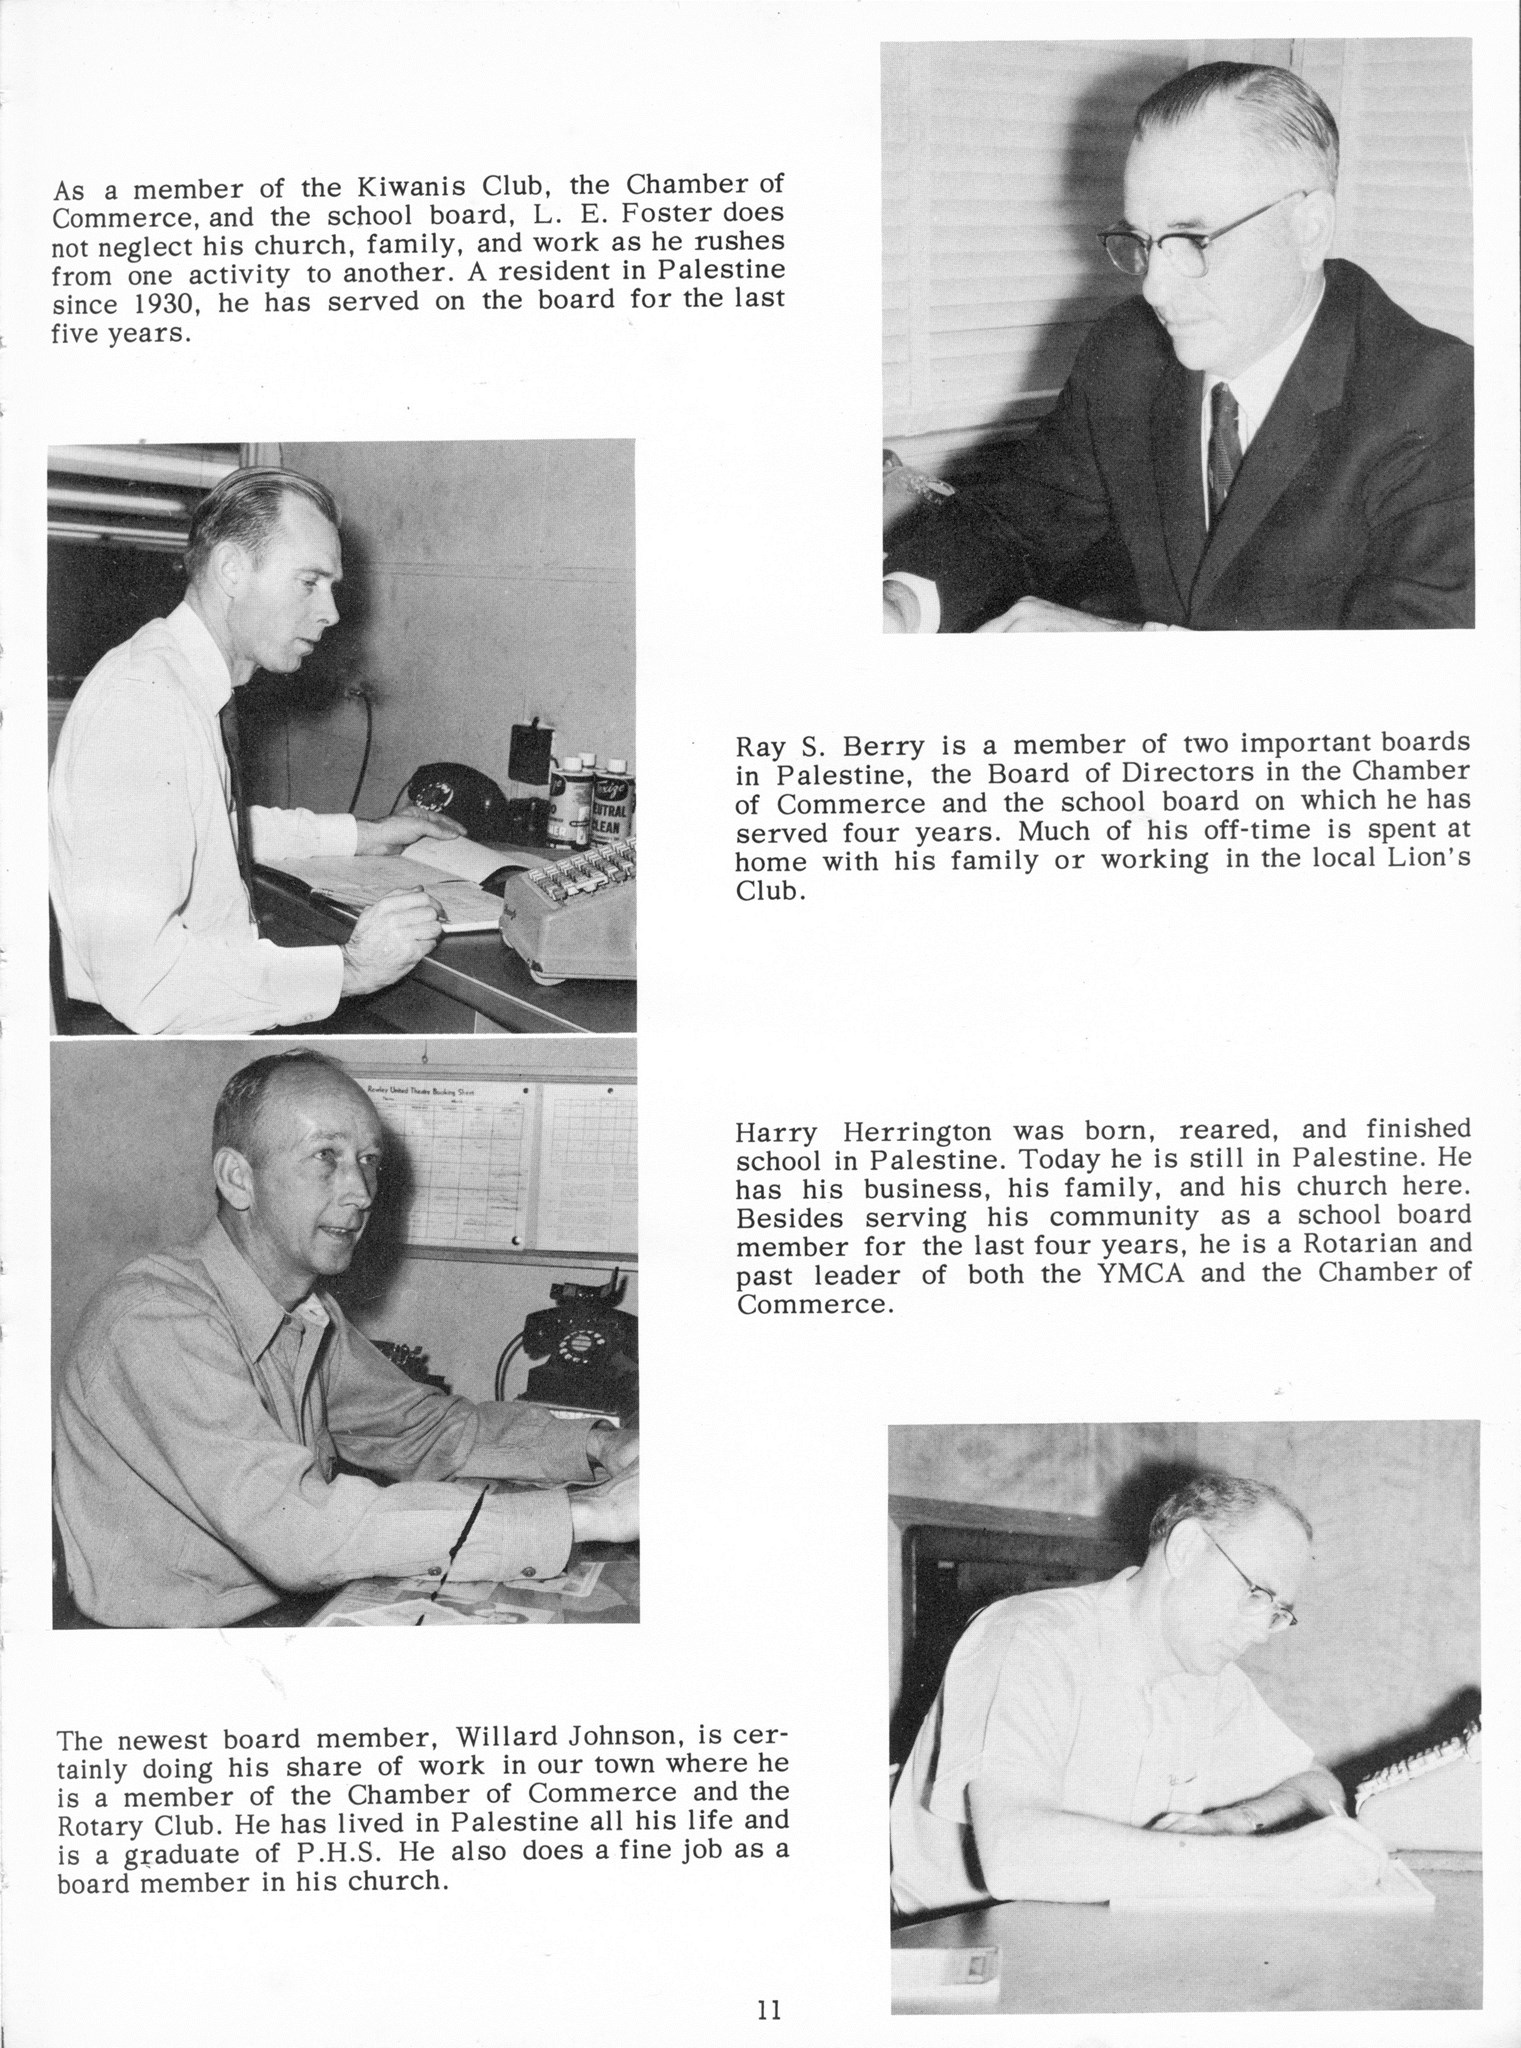 ../../../Images/Large/1960/Arclight-1960-pg0011.jpg